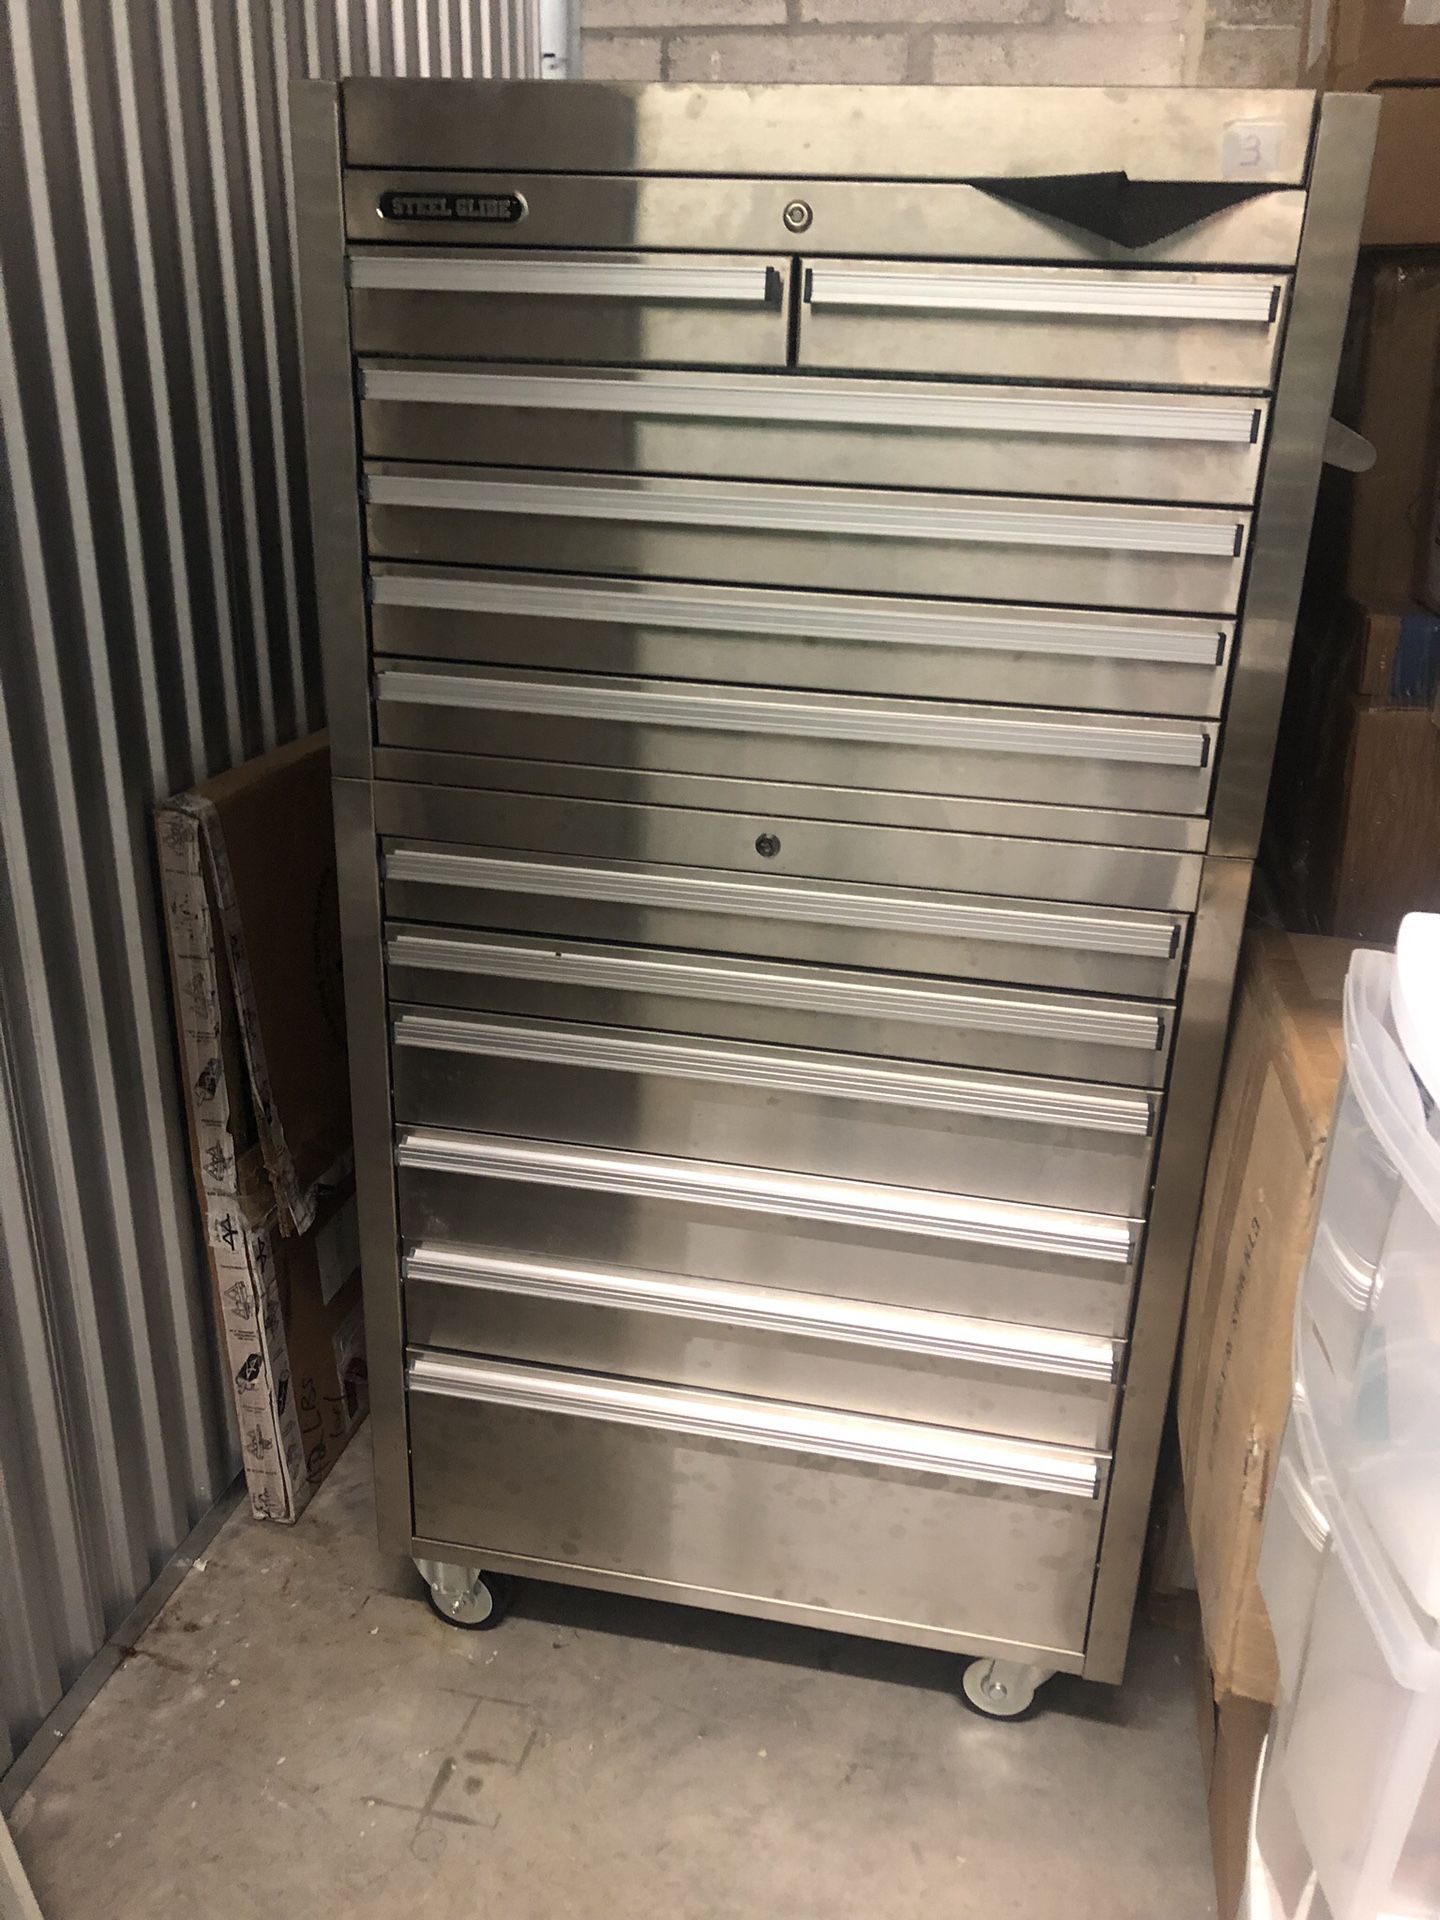 Steel Glide stainless upright tool box